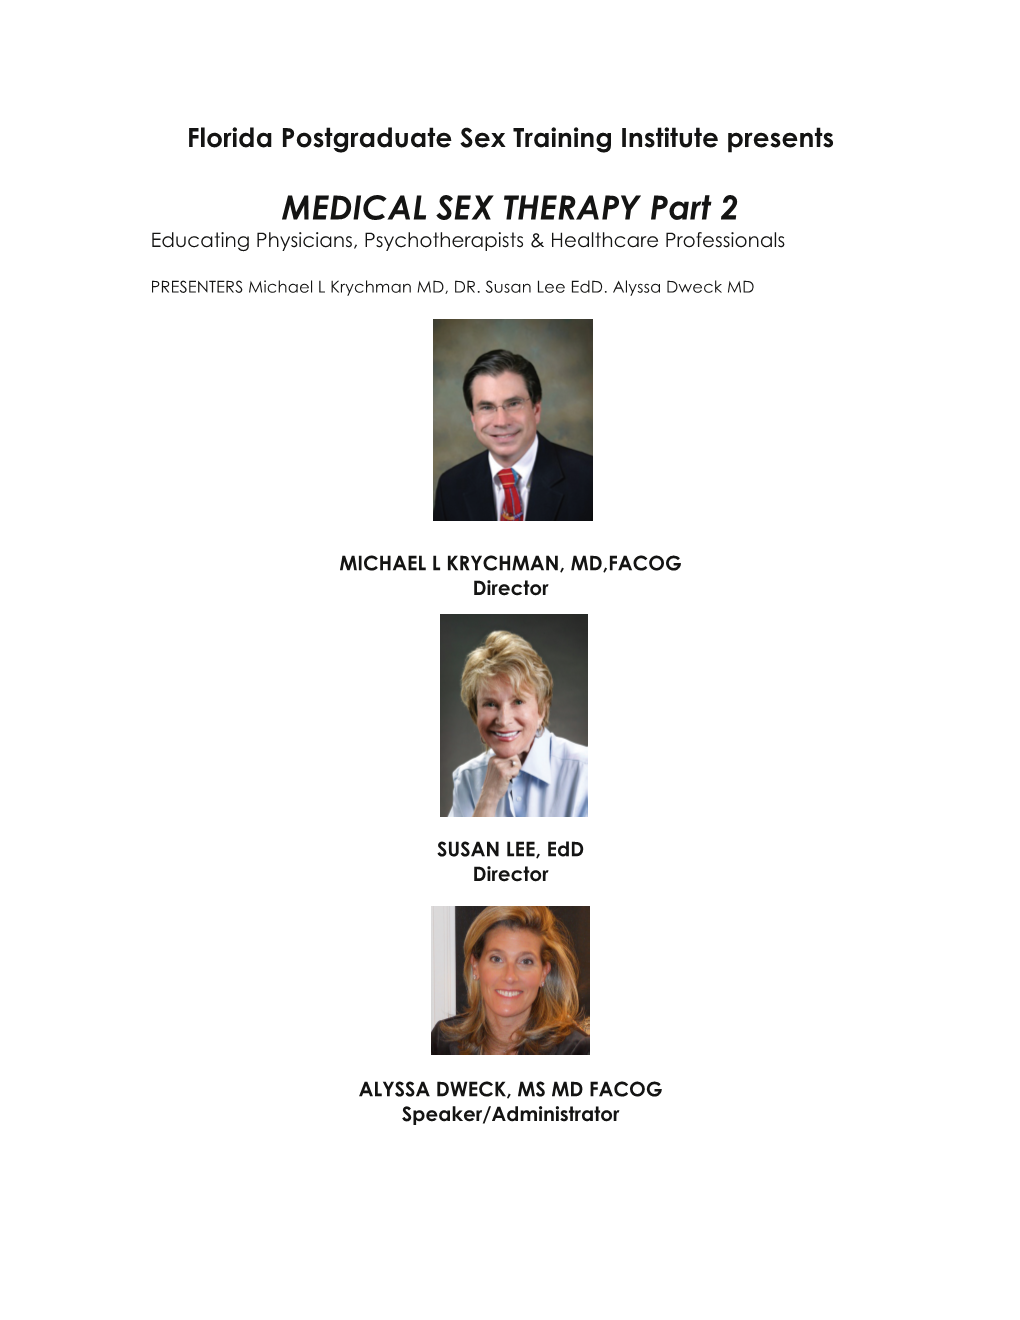 MEDICAL SEX THERAPY Part 2 Educating Physicians, Psychotherapists & Healthcare Professionals